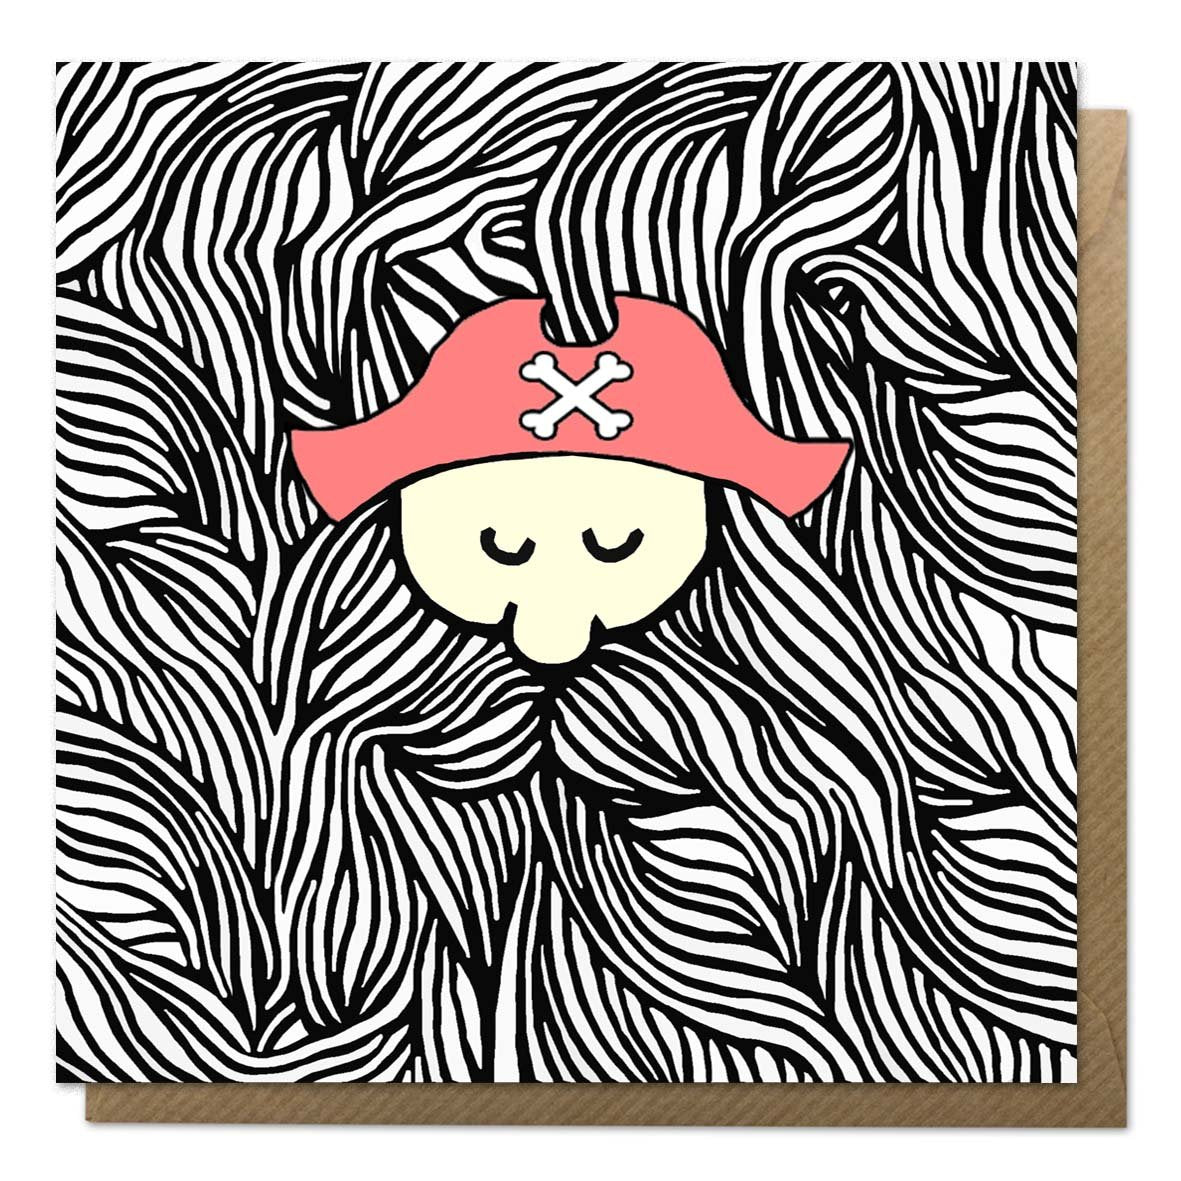 Greeting card with an illustration of a pirate with a giant beard